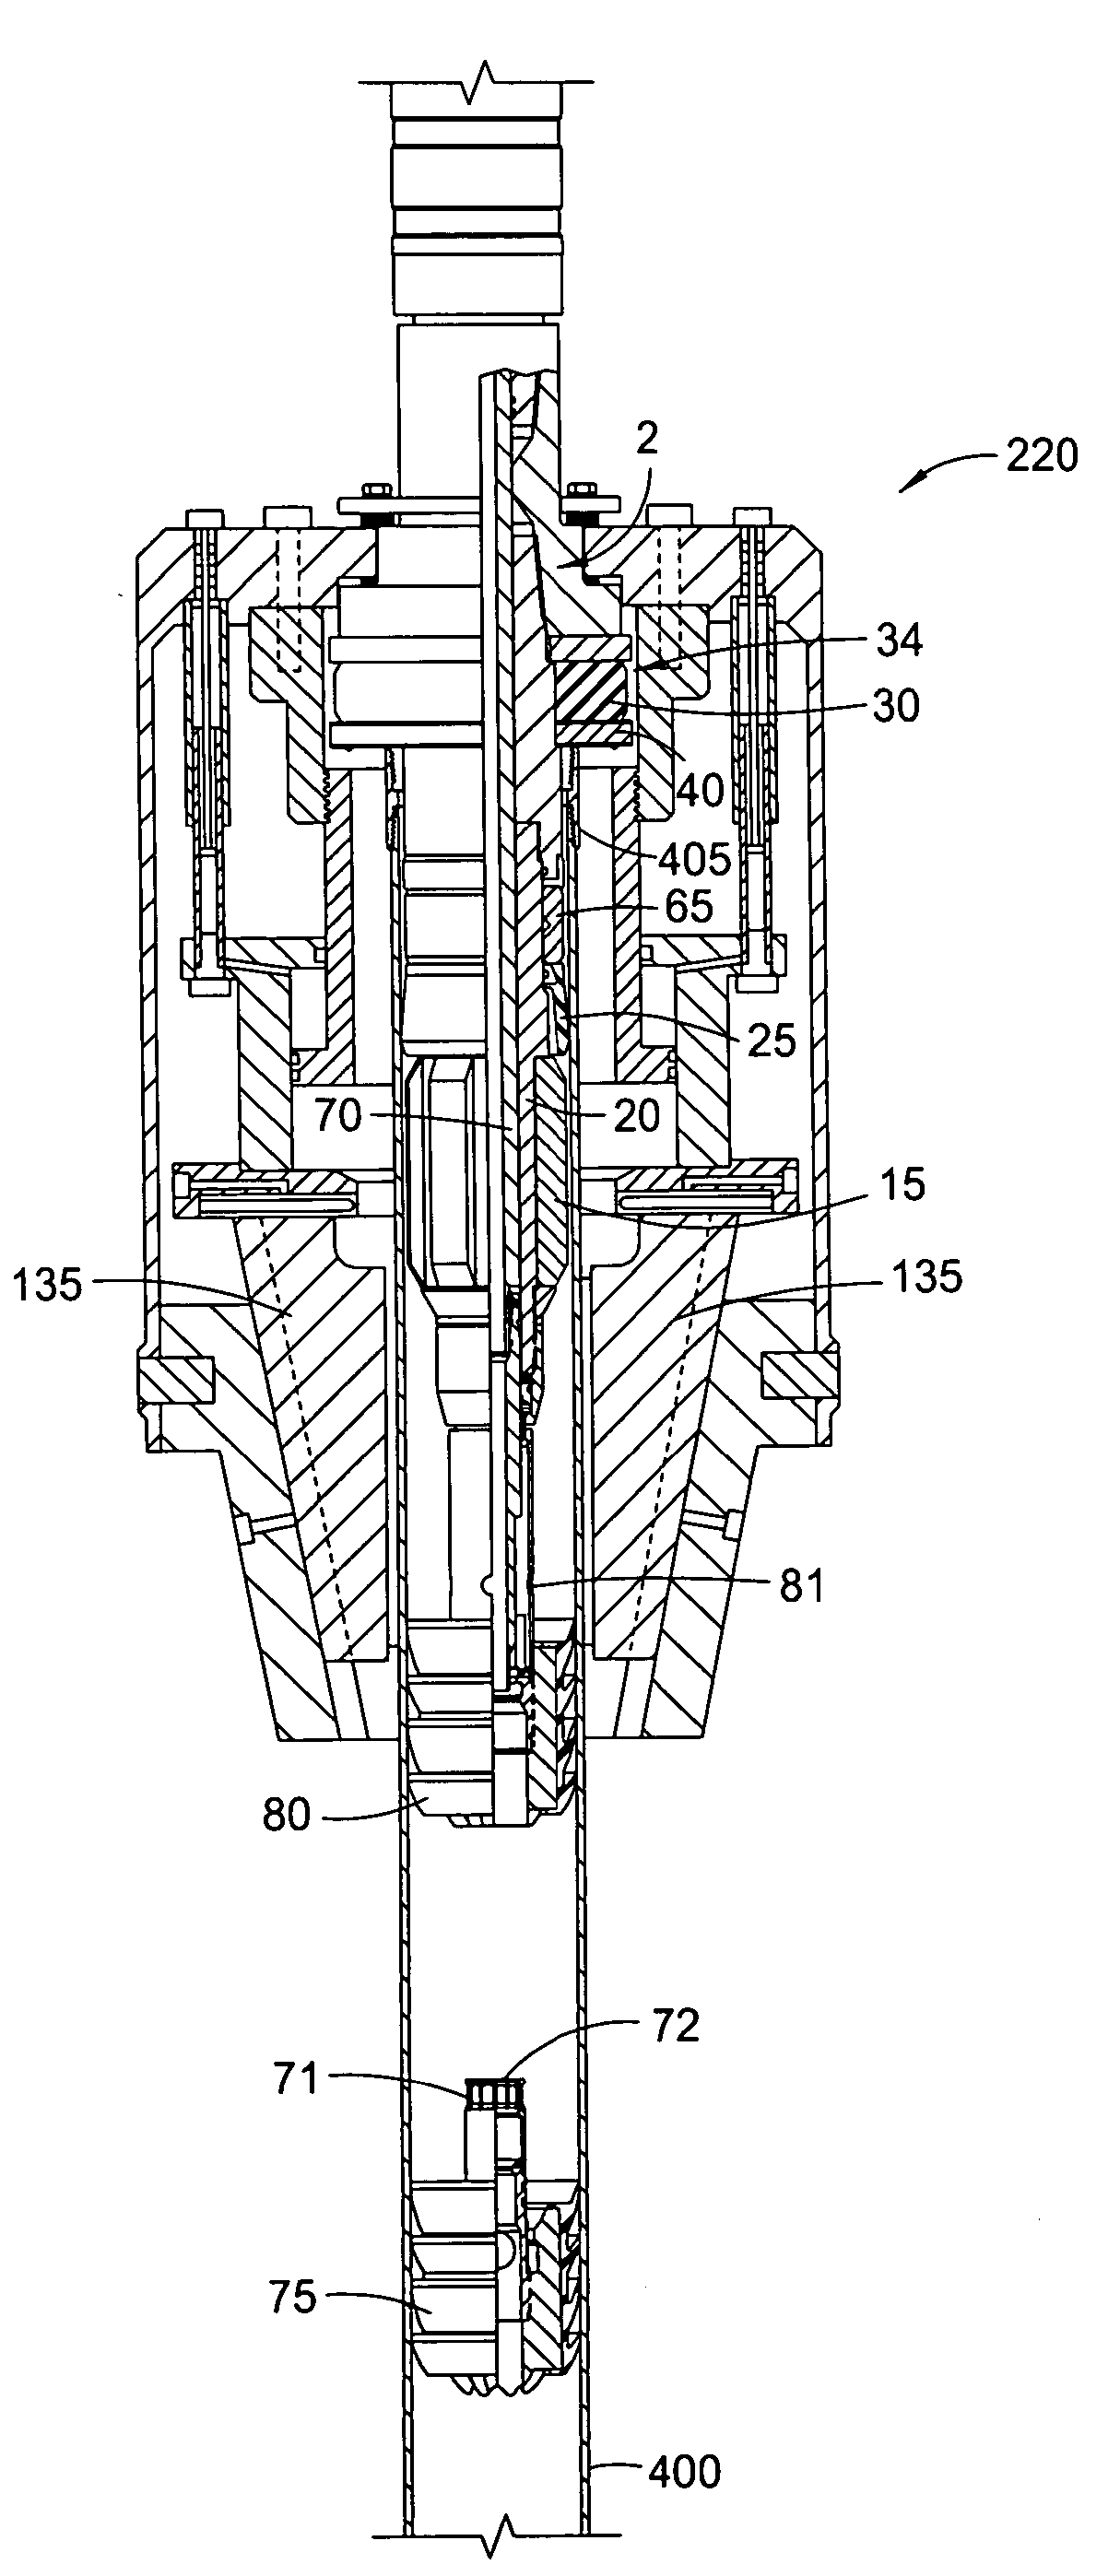 Methods and apparatus for handling and drilling with tubulars or casing